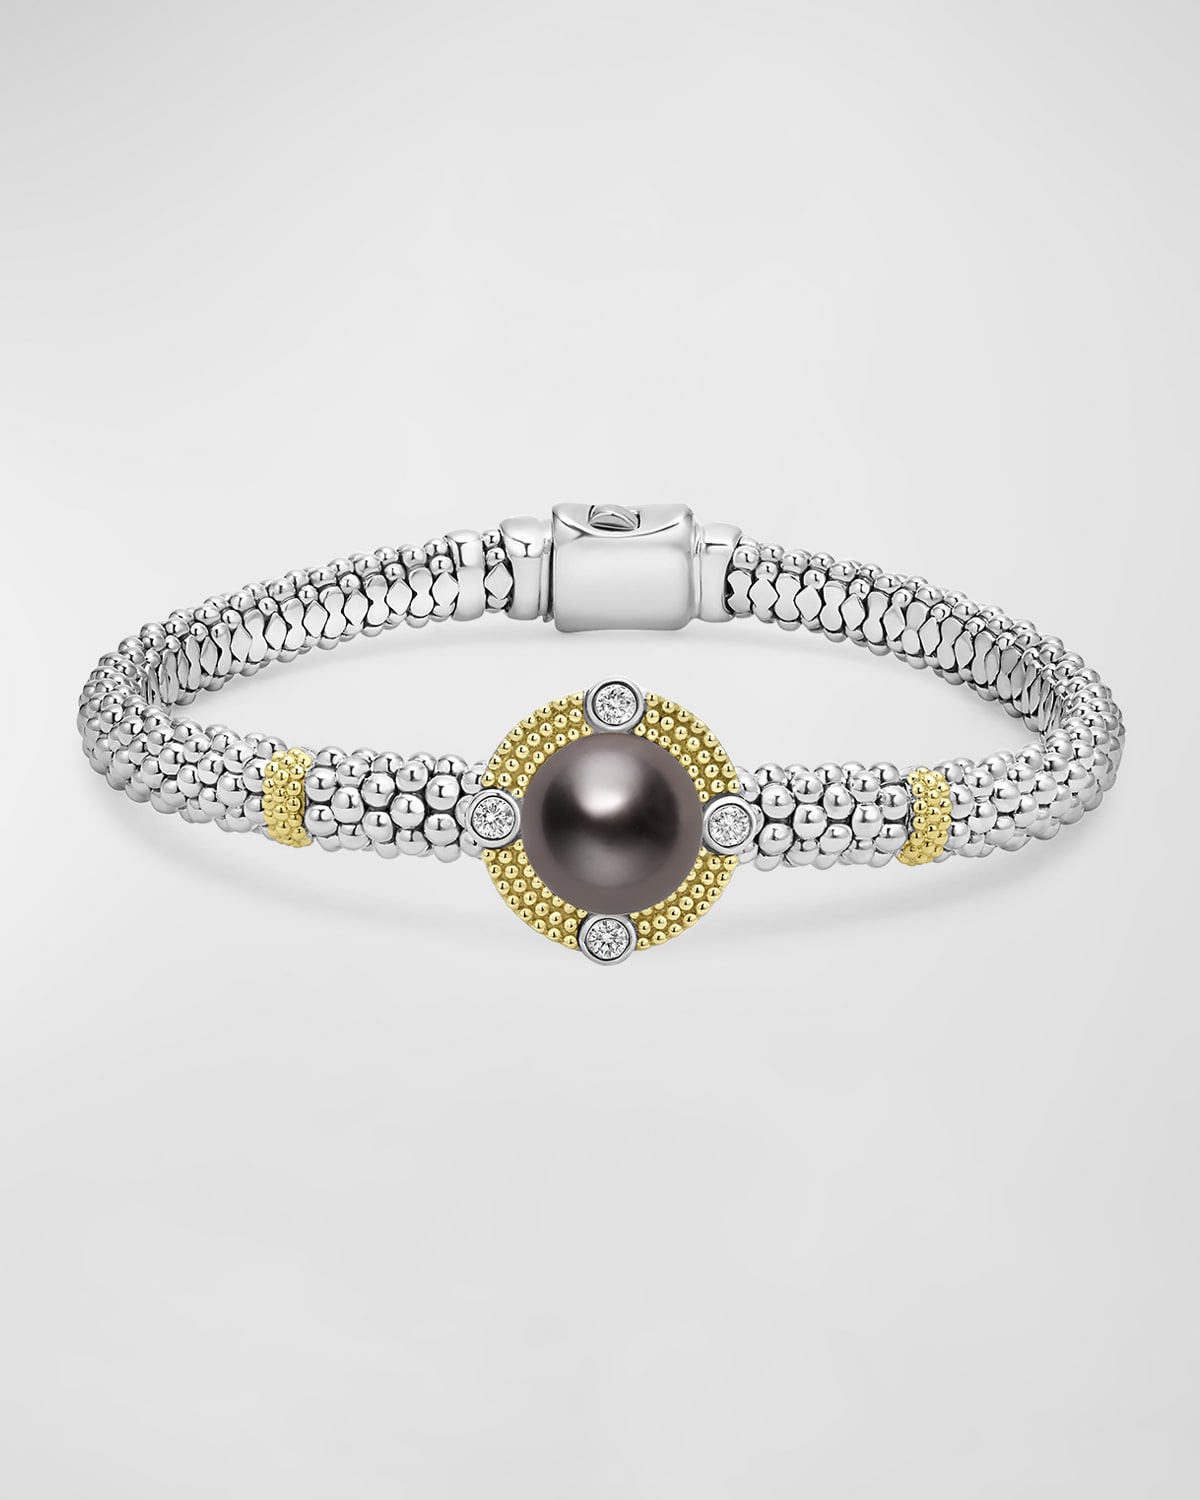 Luna Sterling Silver and 18K Gold Caviar Beaded Bracelet with Black Pearl